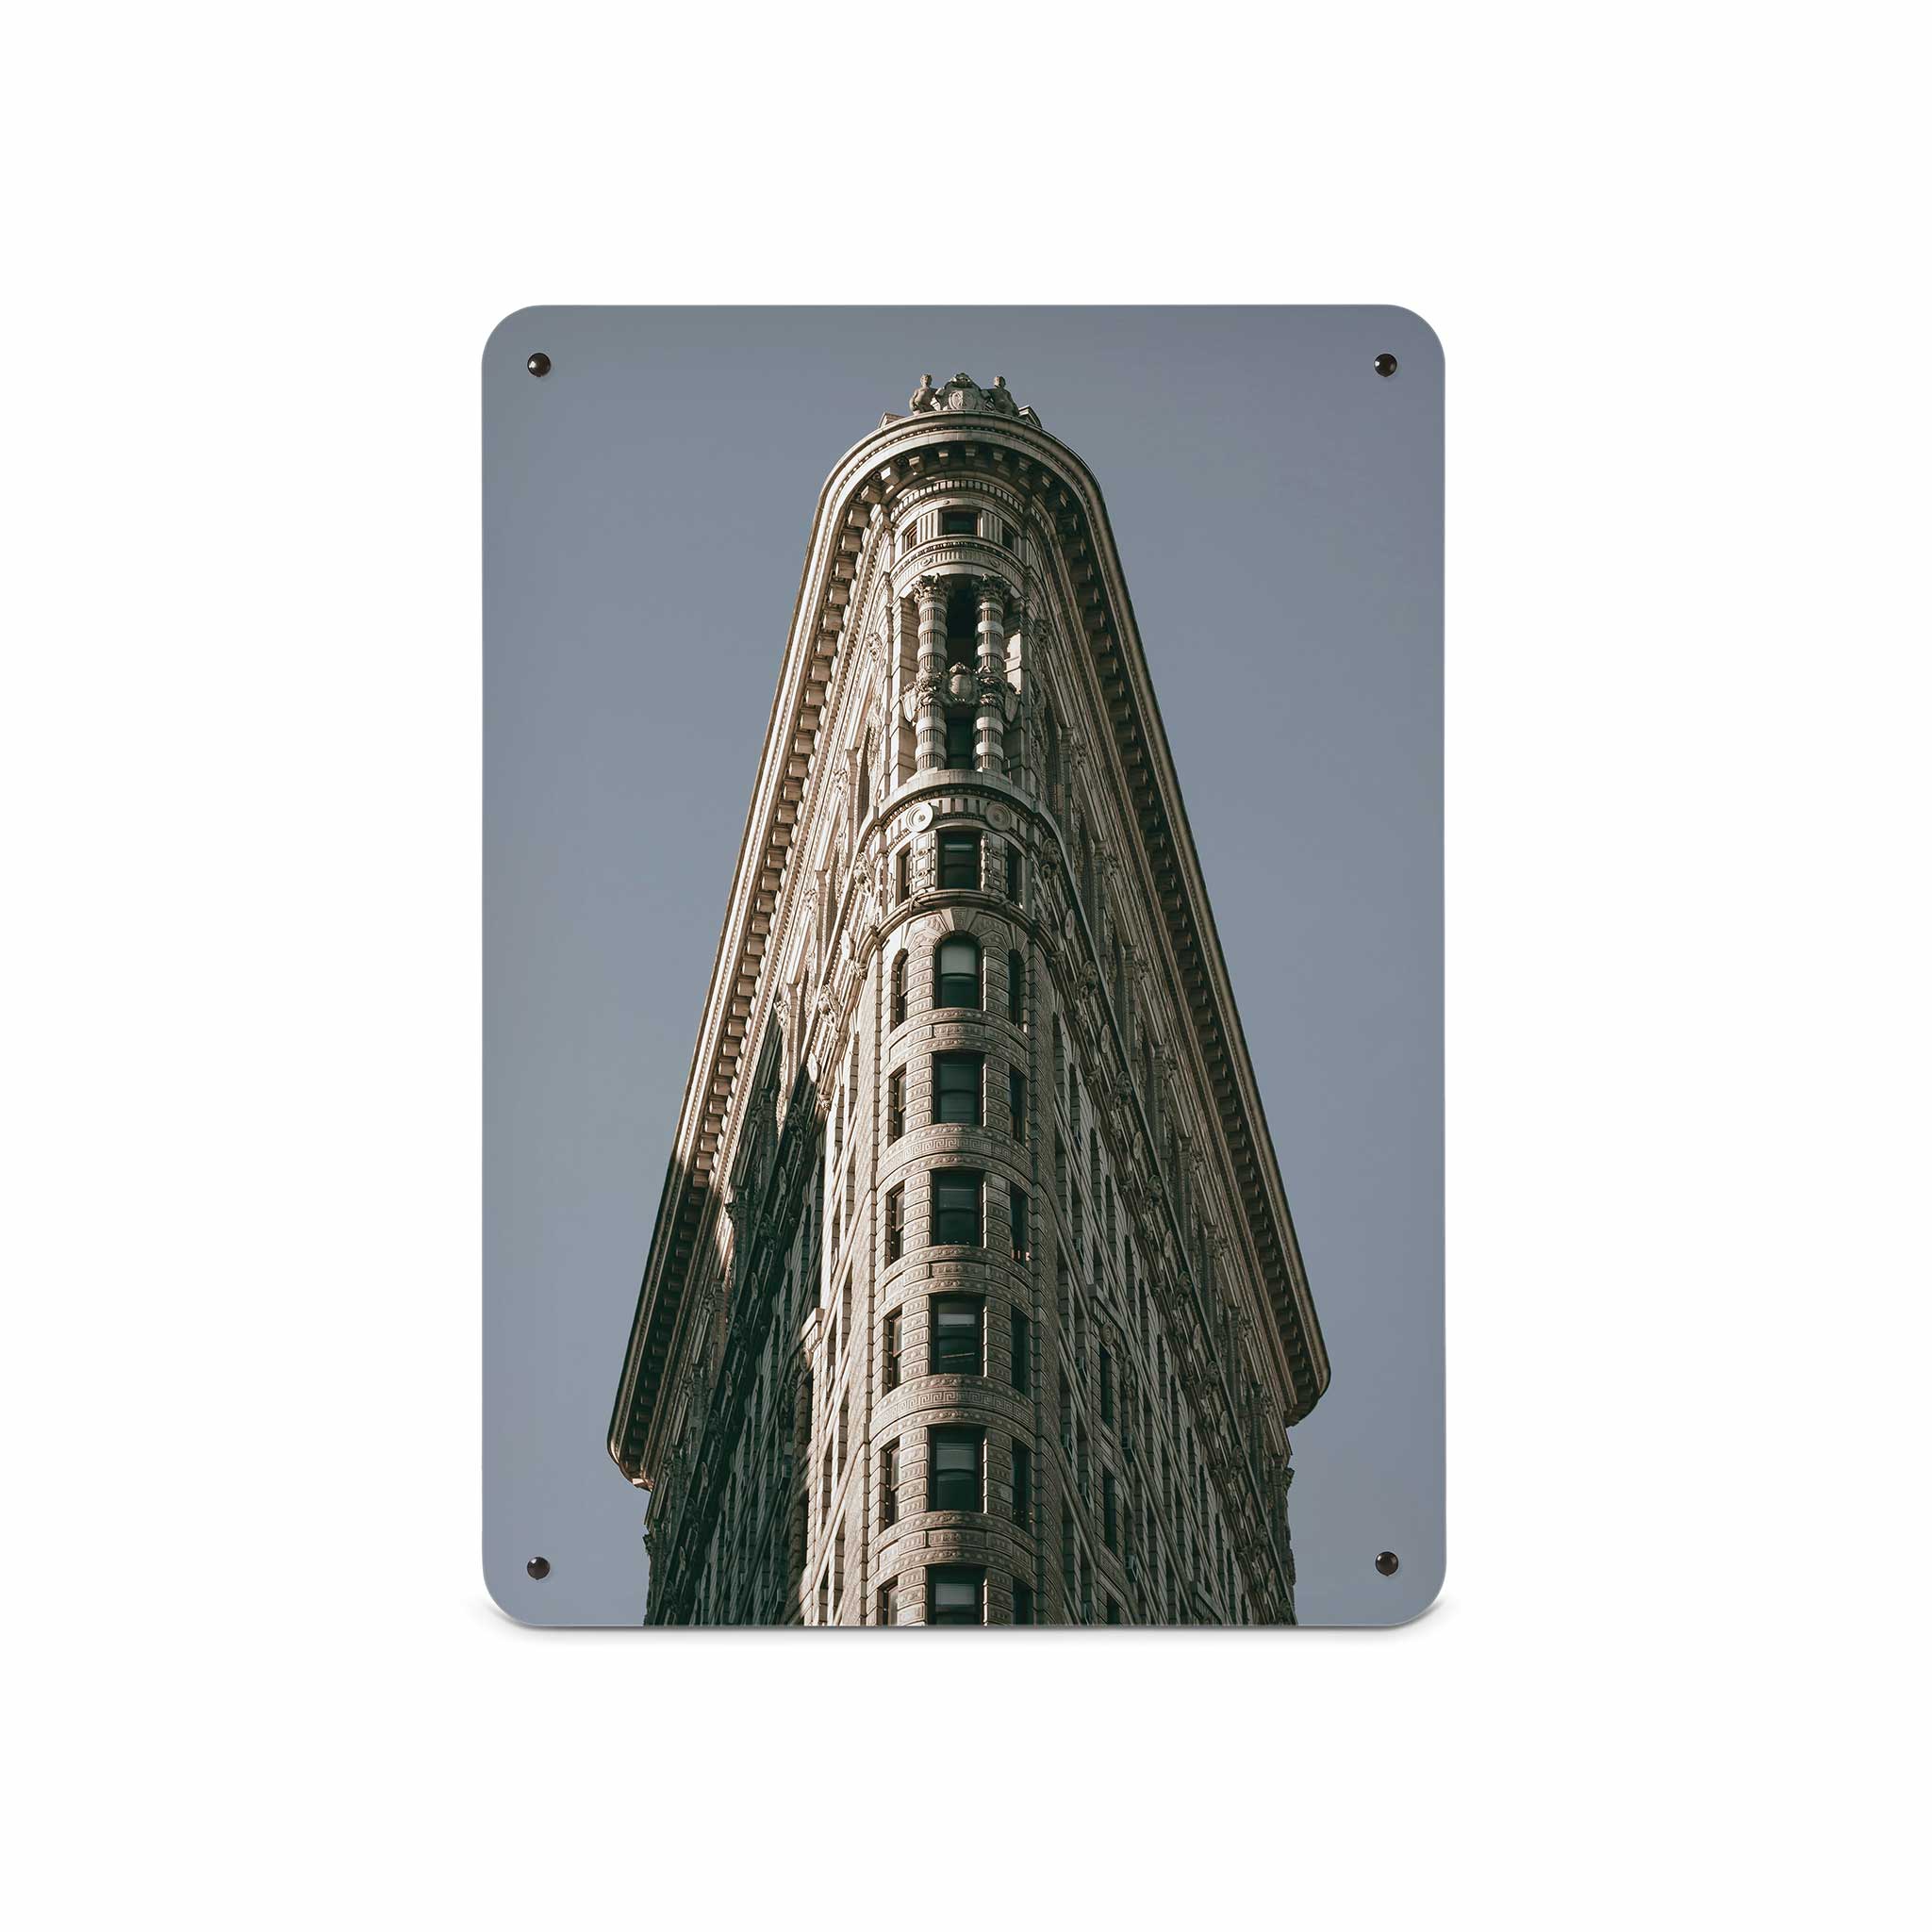 A medium magnetic notice board by Beyond the Fridge with an image of the flatiron building in Manhattan 